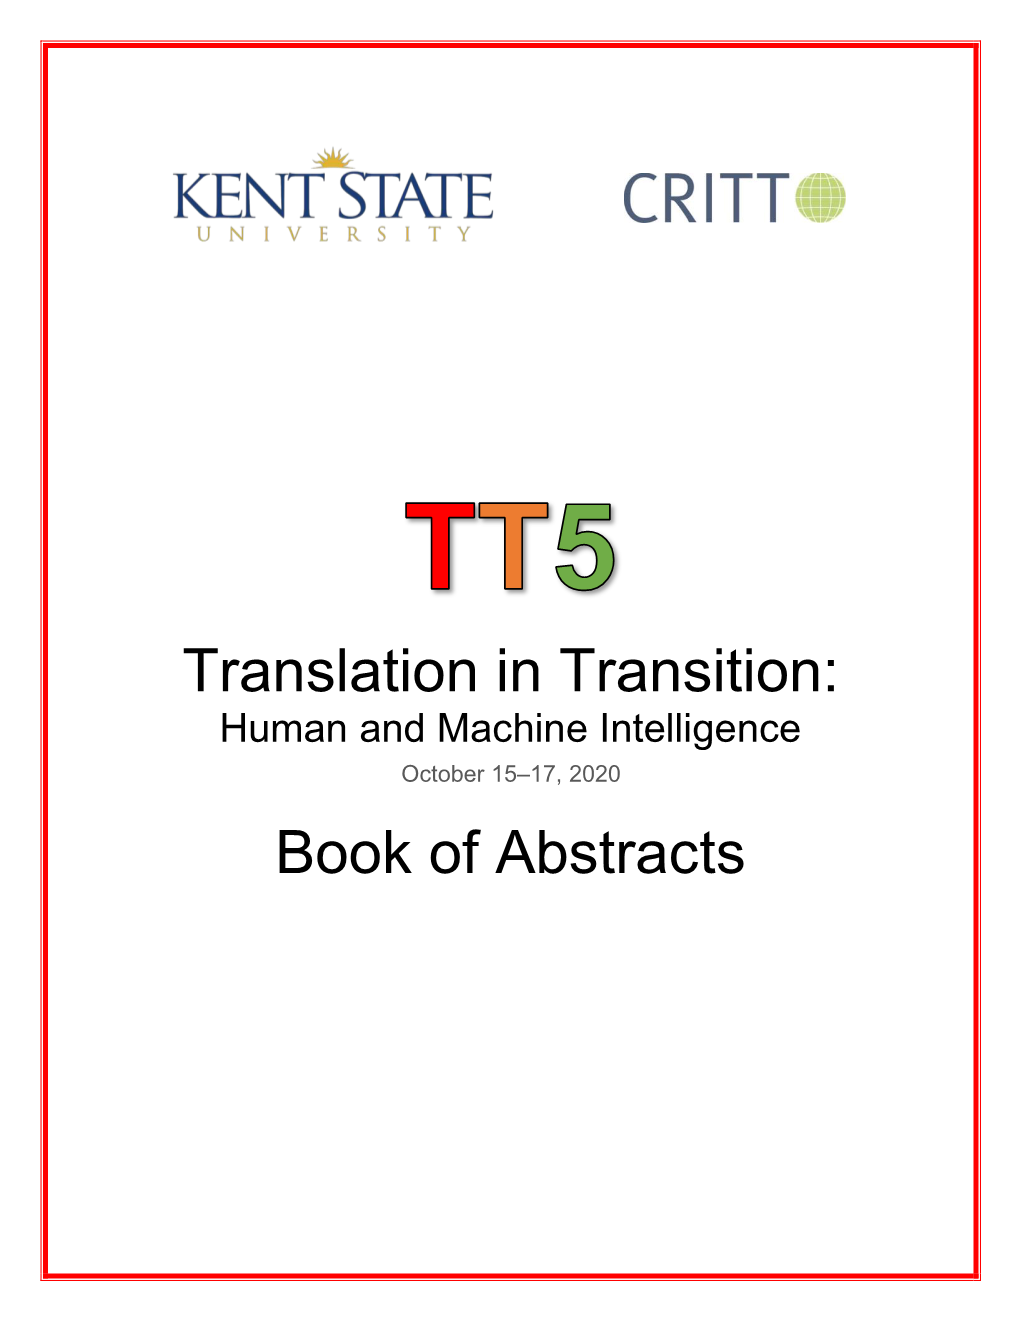 Translation in Transition: Book of Abstracts